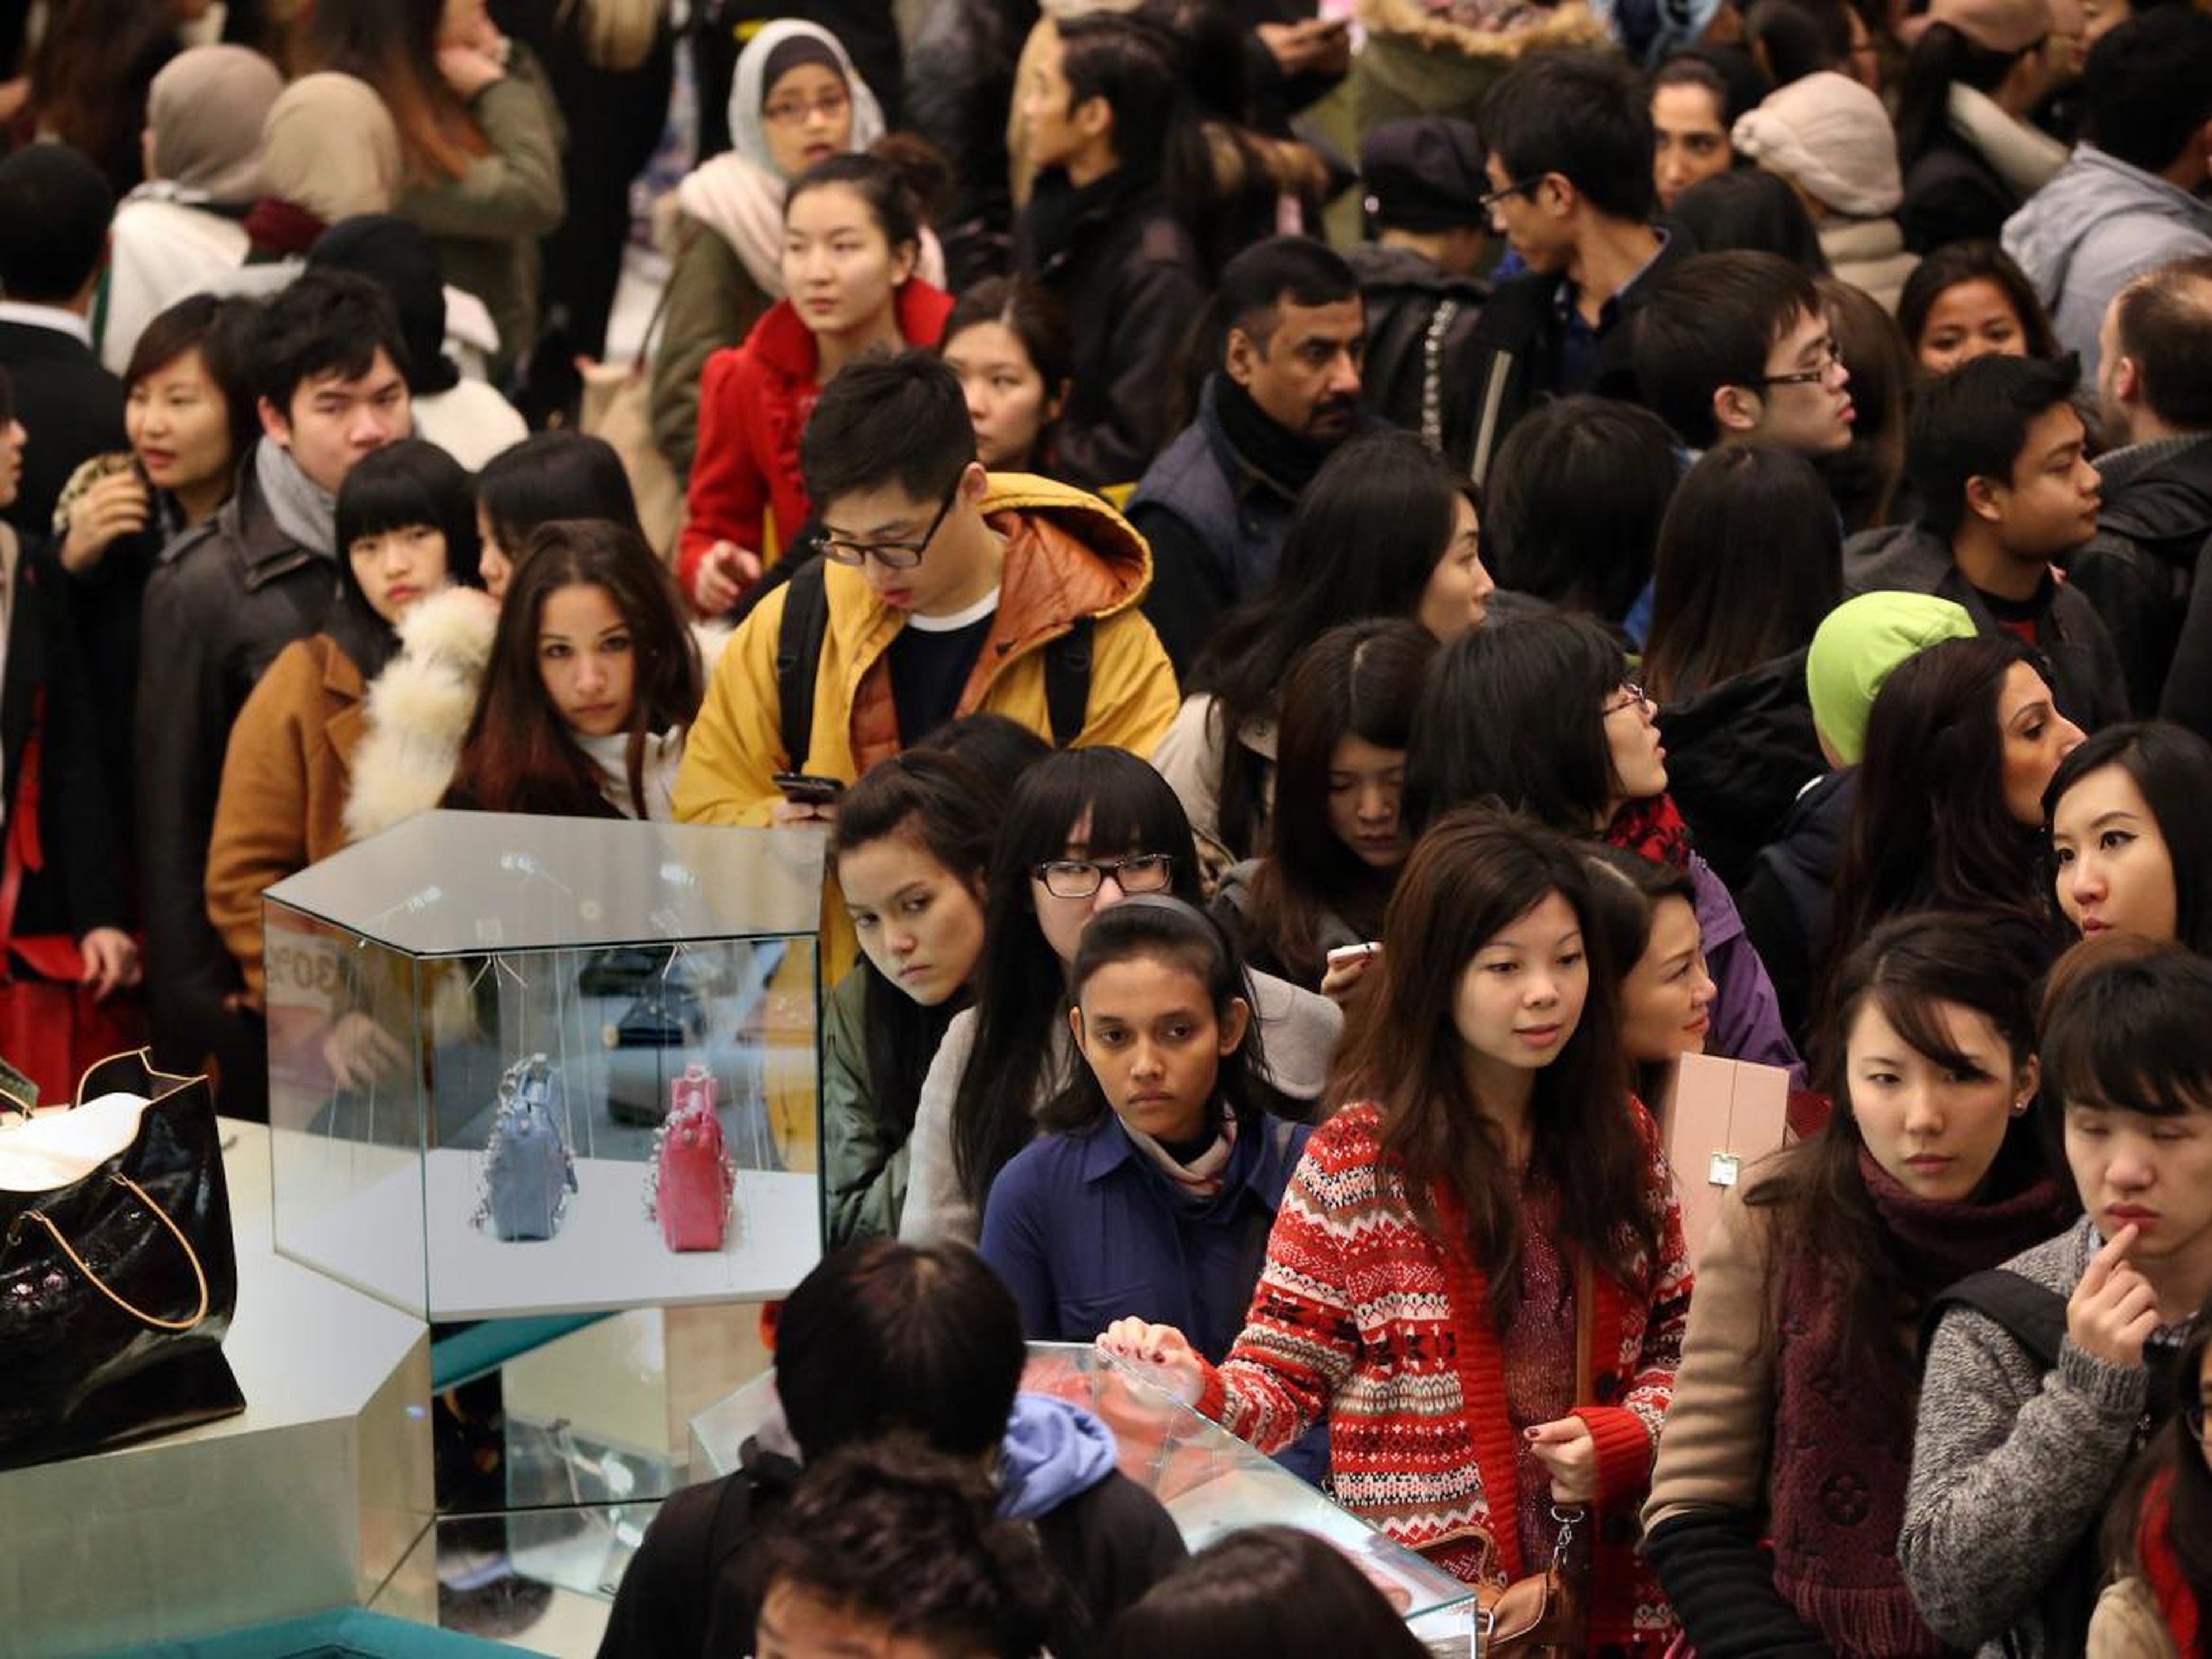 Millions of shoppers spill into stores, such as department stores in London, in hopes of finding bargains.